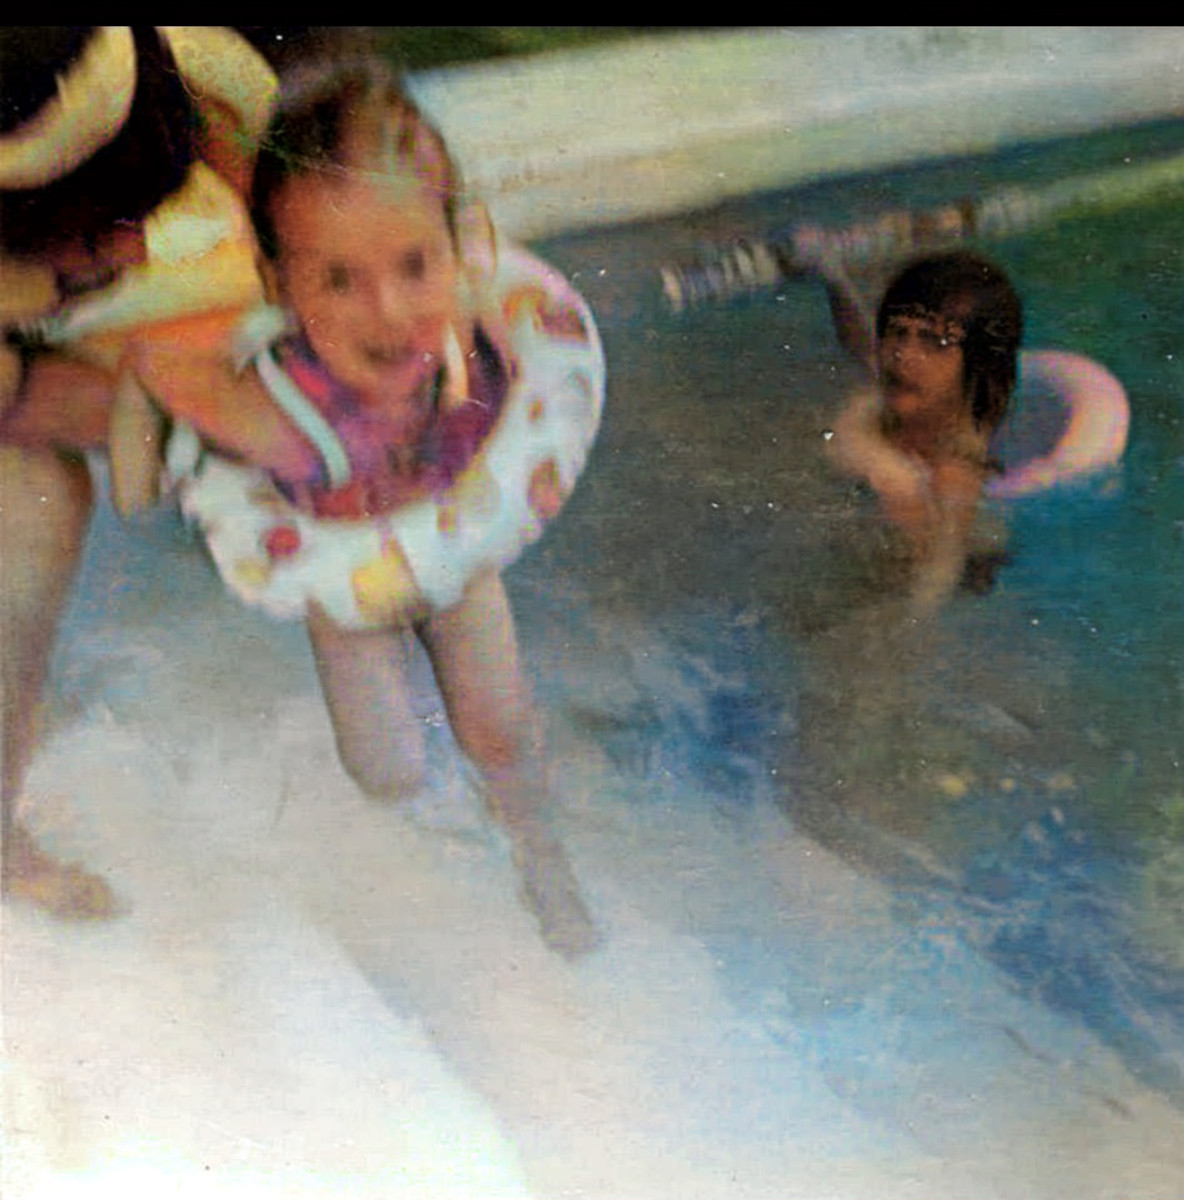 Me in the swimming pool at Butlins Pwllheli on a family holiday, when mum was trying to teach me to swim